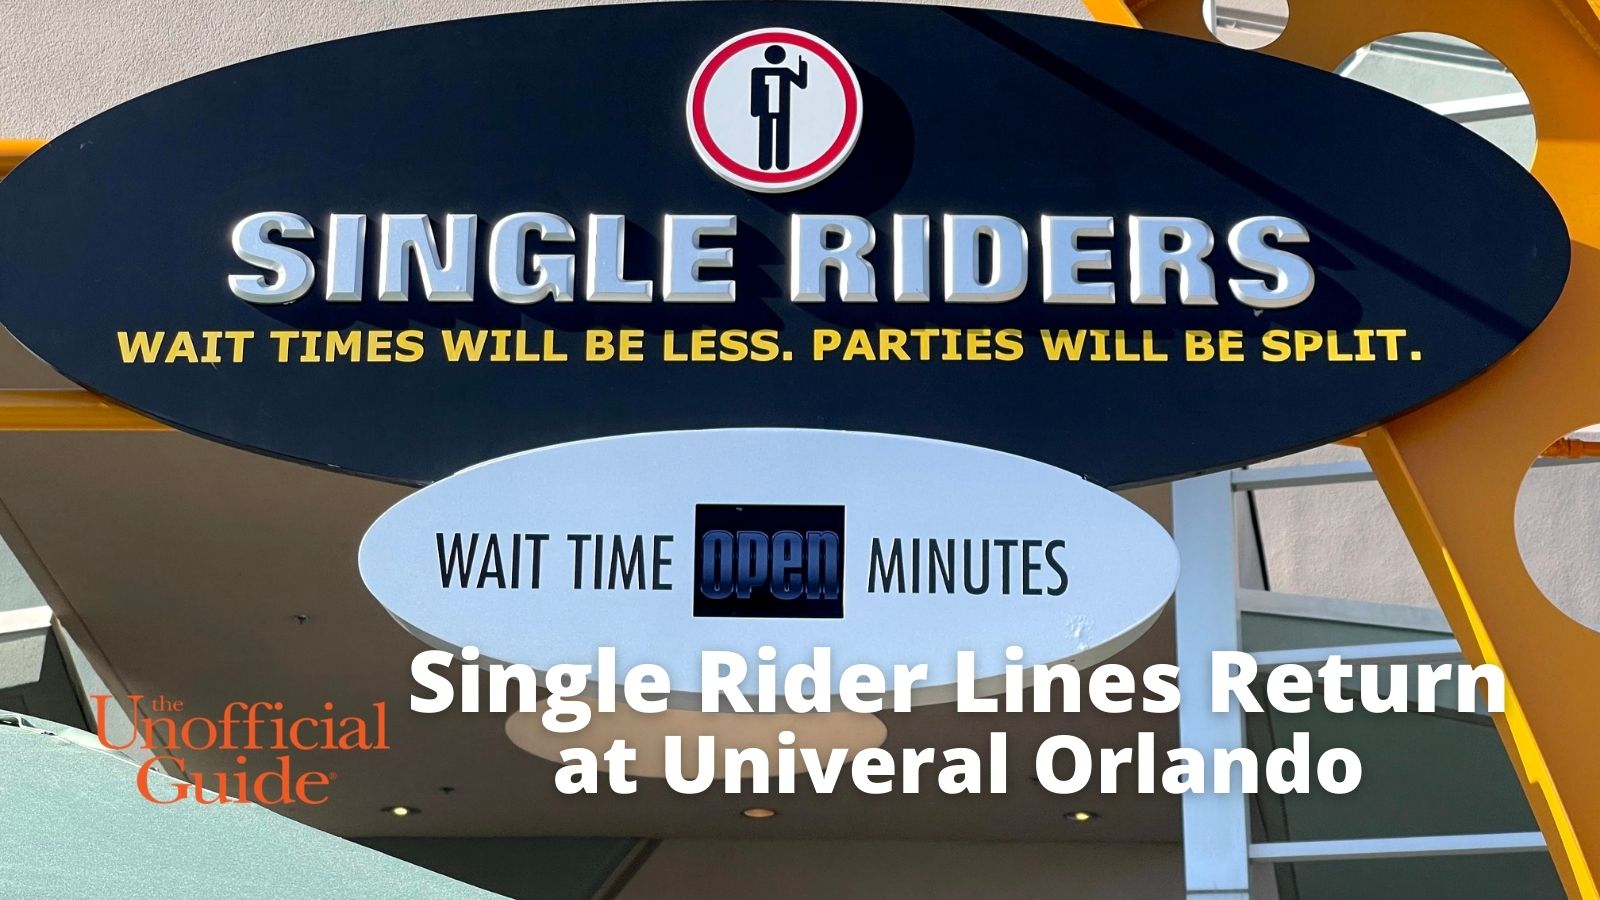 2021 Unofficial Guide to Single Rider Lines at Universal Orlando -